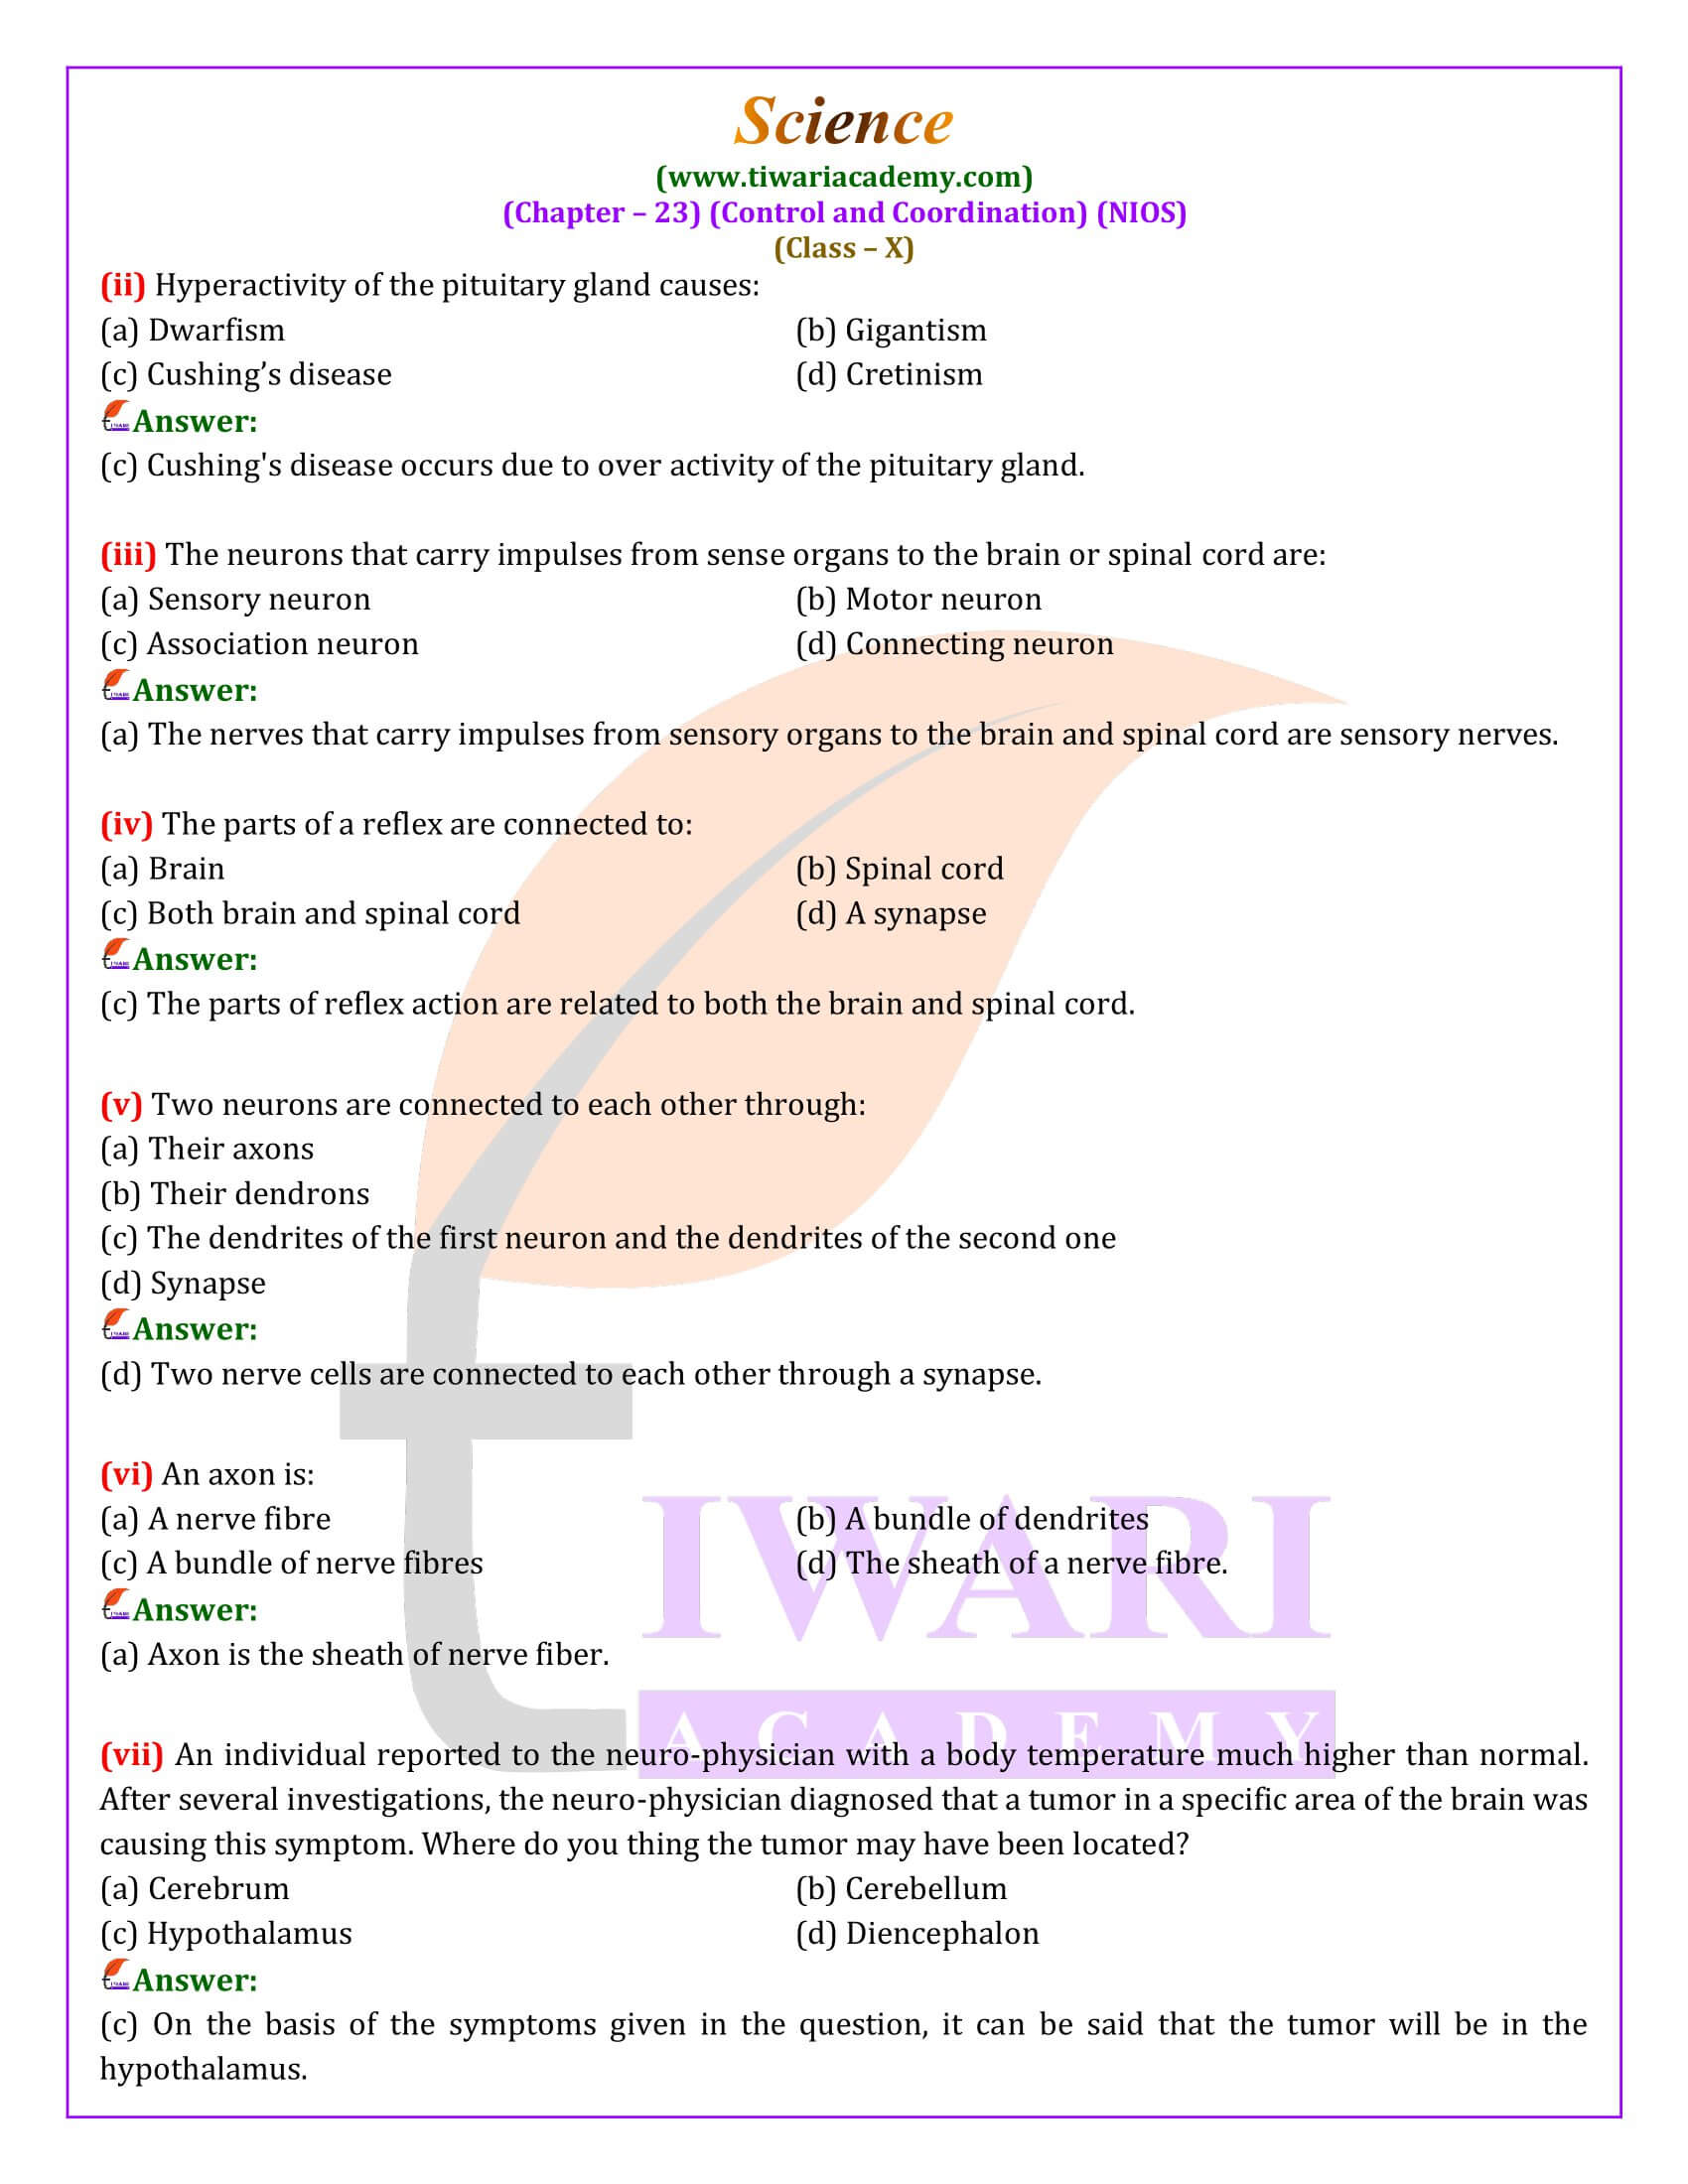 NIOS Class 10 Science Chapter 23 Question Answers